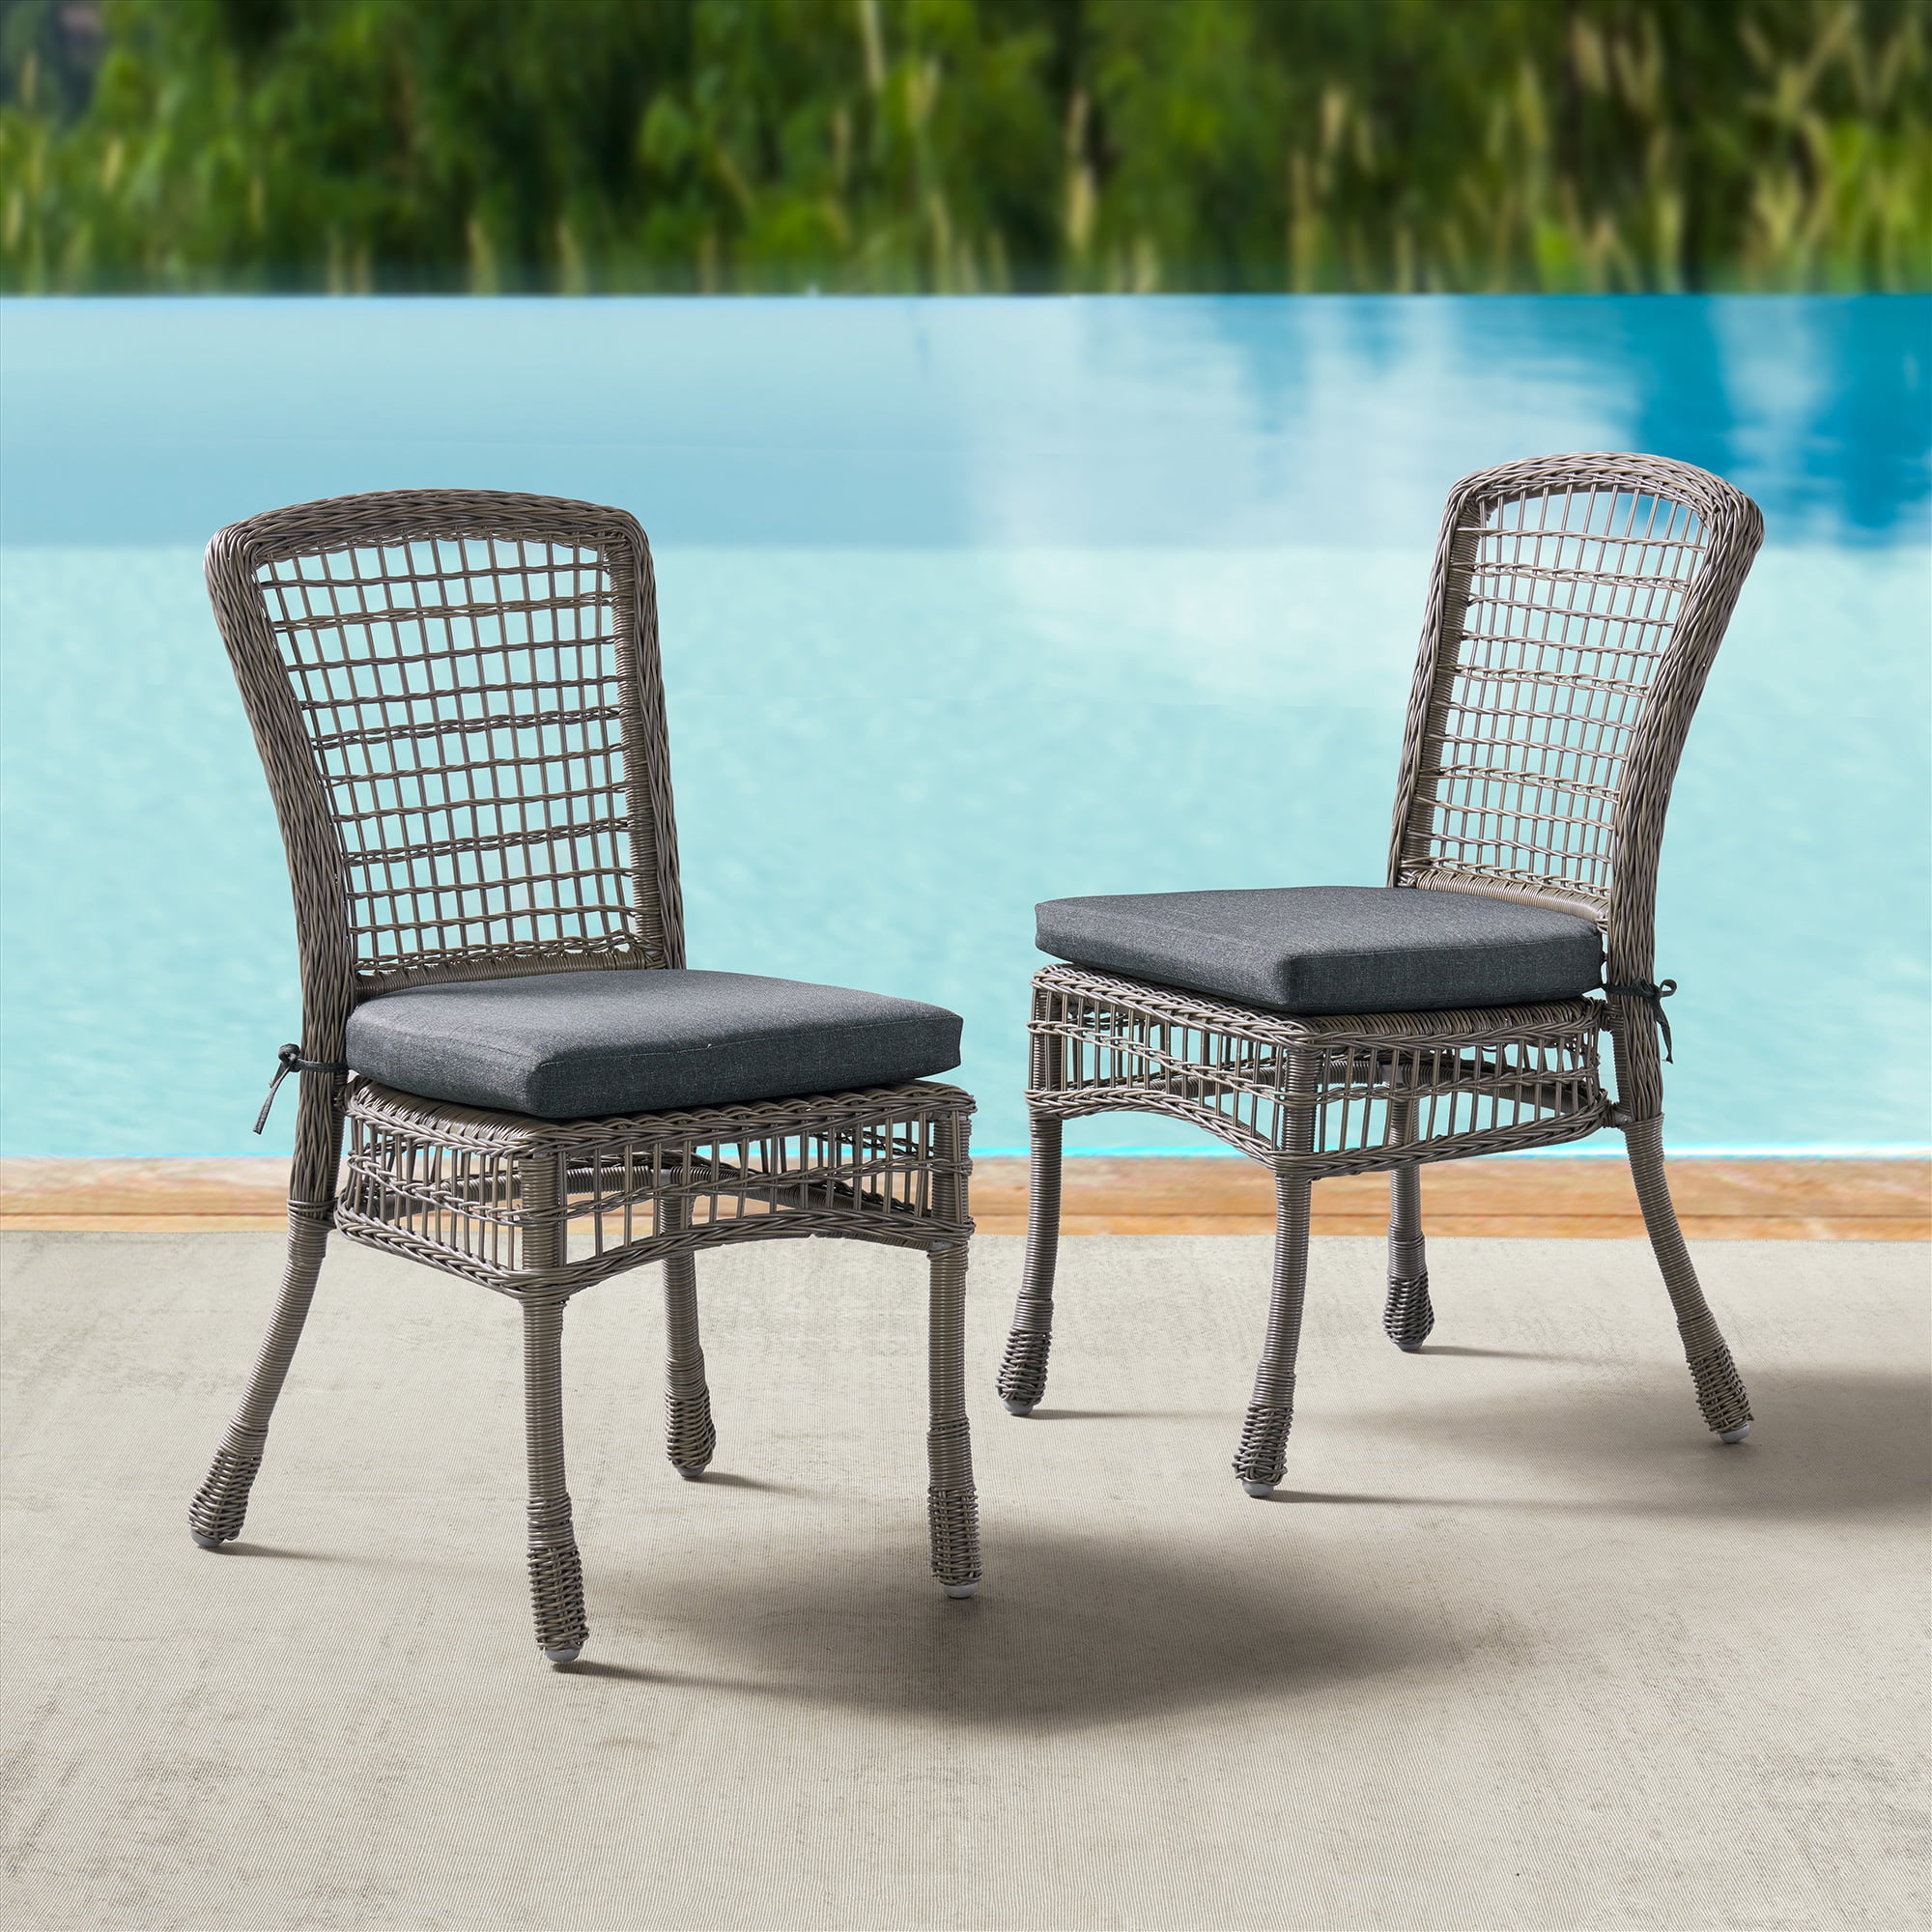 Alaterre Asti Outdoor Dining Chair, Pier One Outdoor Dining Chairs